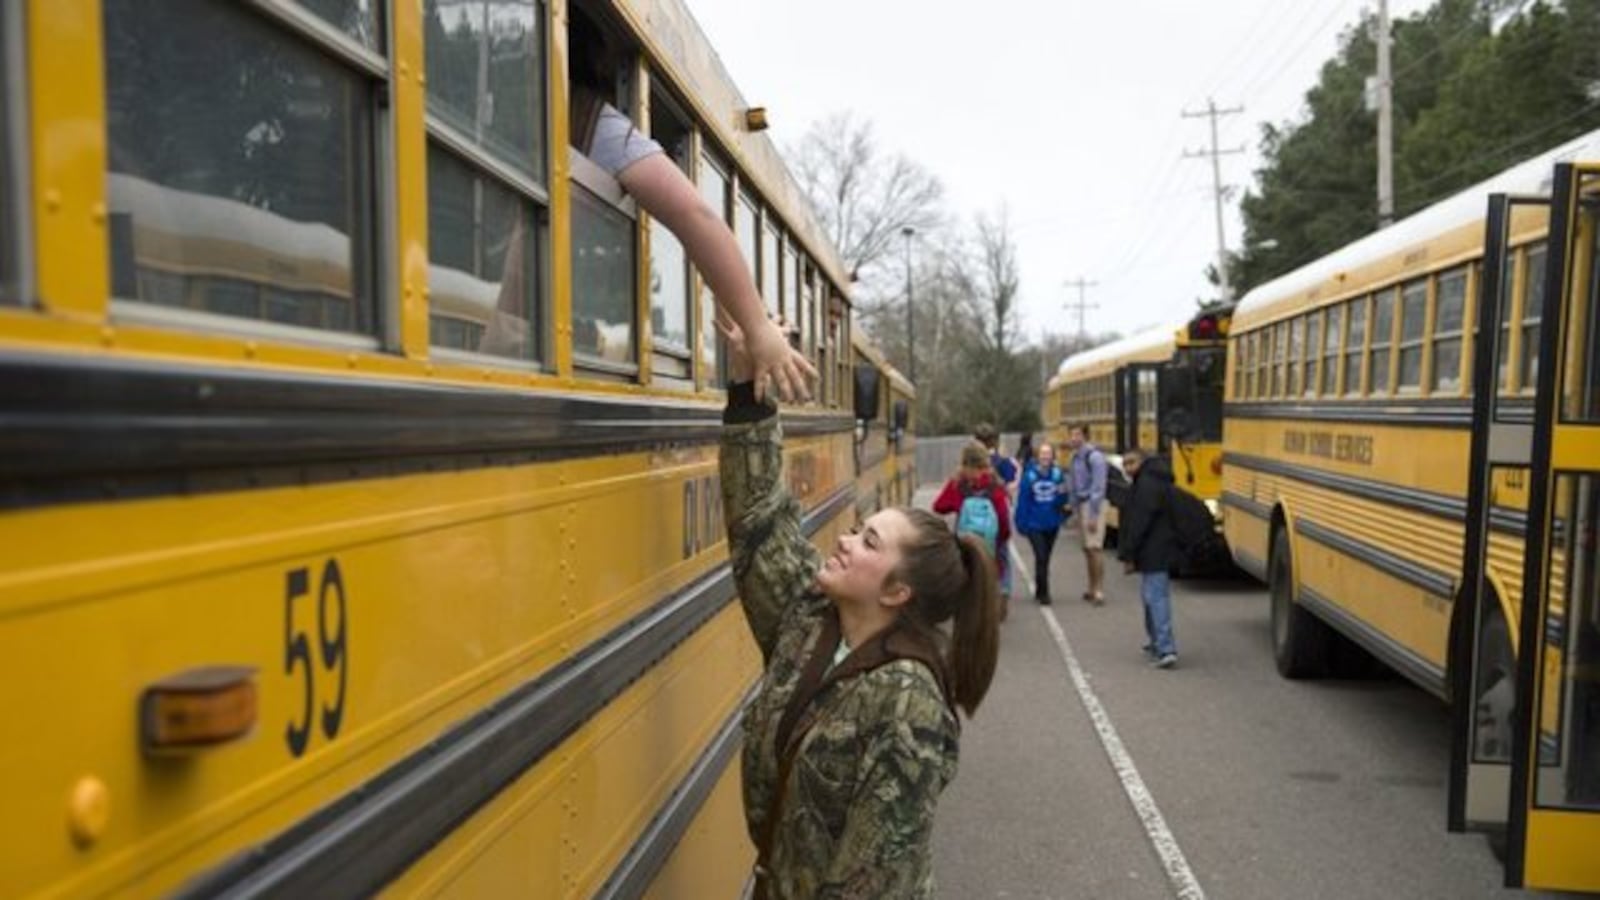 In a 2015 photo, a student says goodbye to her friend as the pair board buses for home at the end of a school day at Bartlett Ninth Grade Academy.